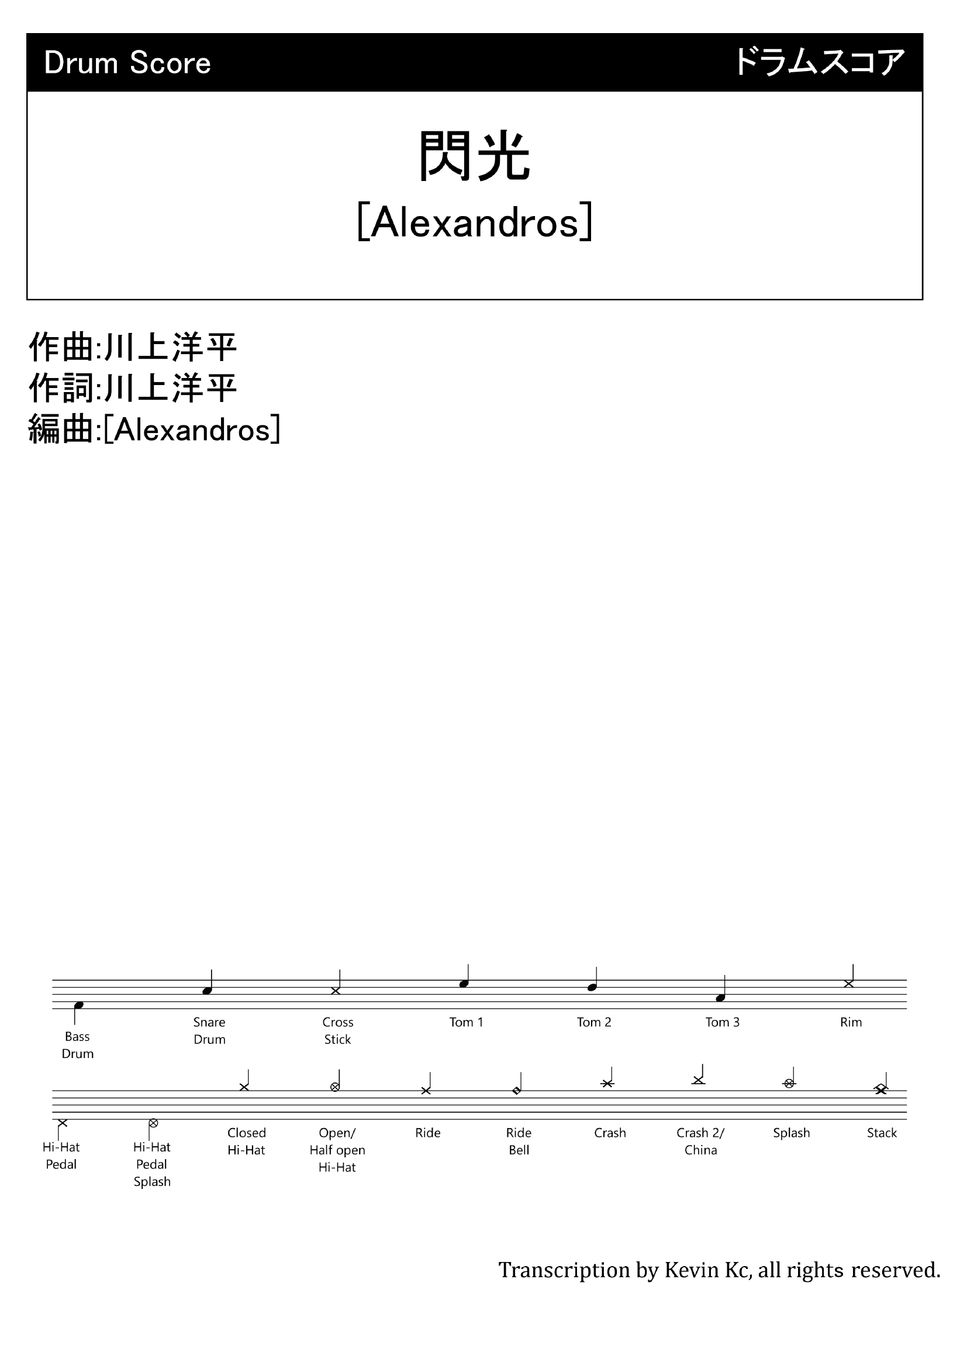 [Alexandros] - 閃光 by Kevin Kc